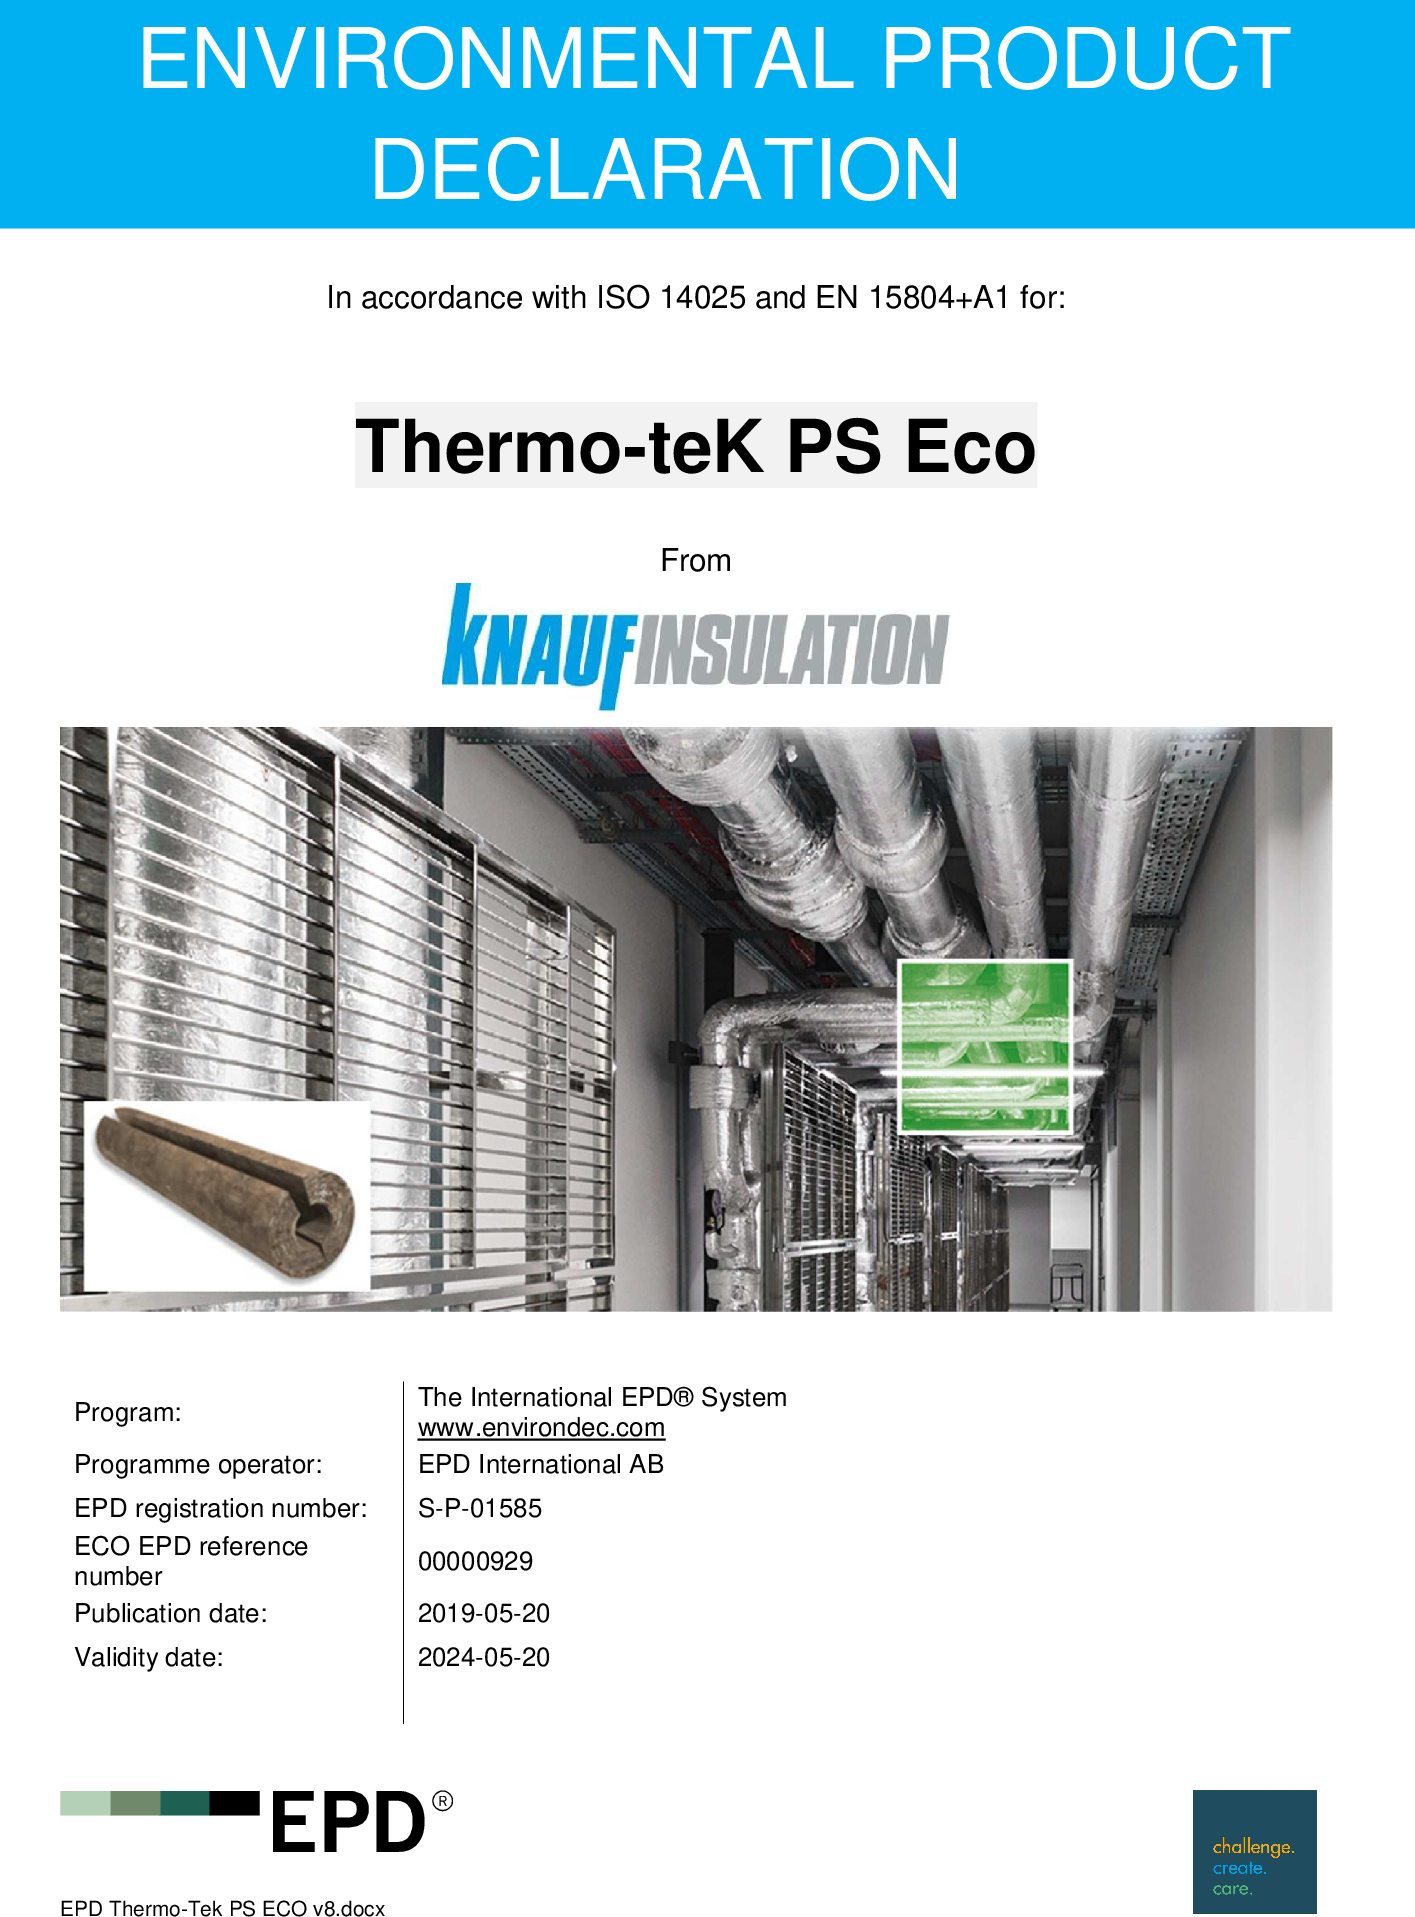 EPD Thermo-teK PS Eco